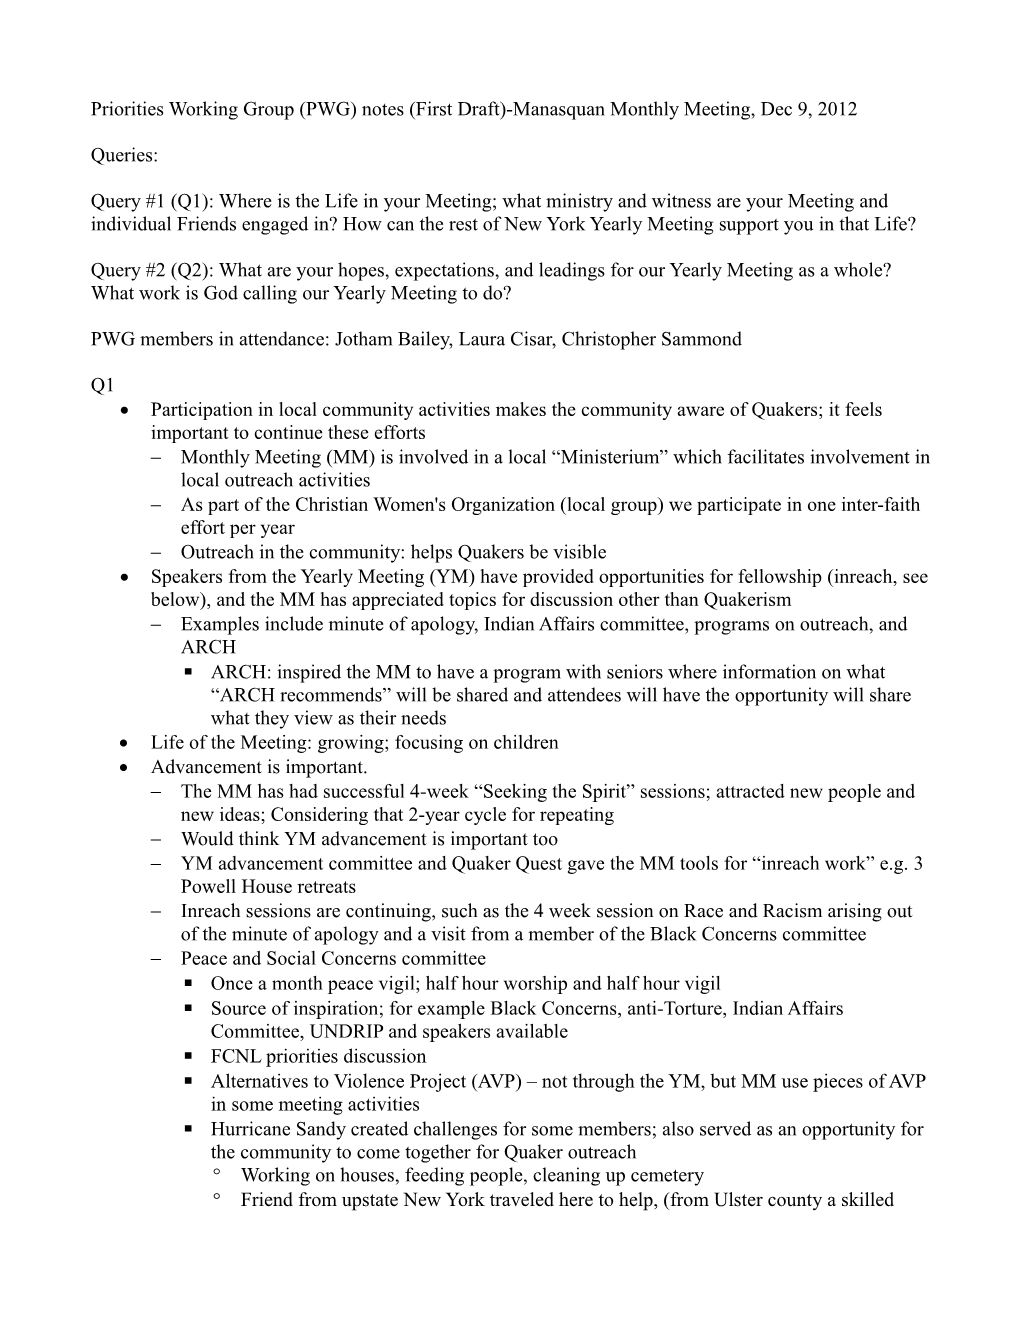 Priorities Working Group (PWG) Notes (First Draft)-Manasquan Monthly Meeting, Dec 9, 2012